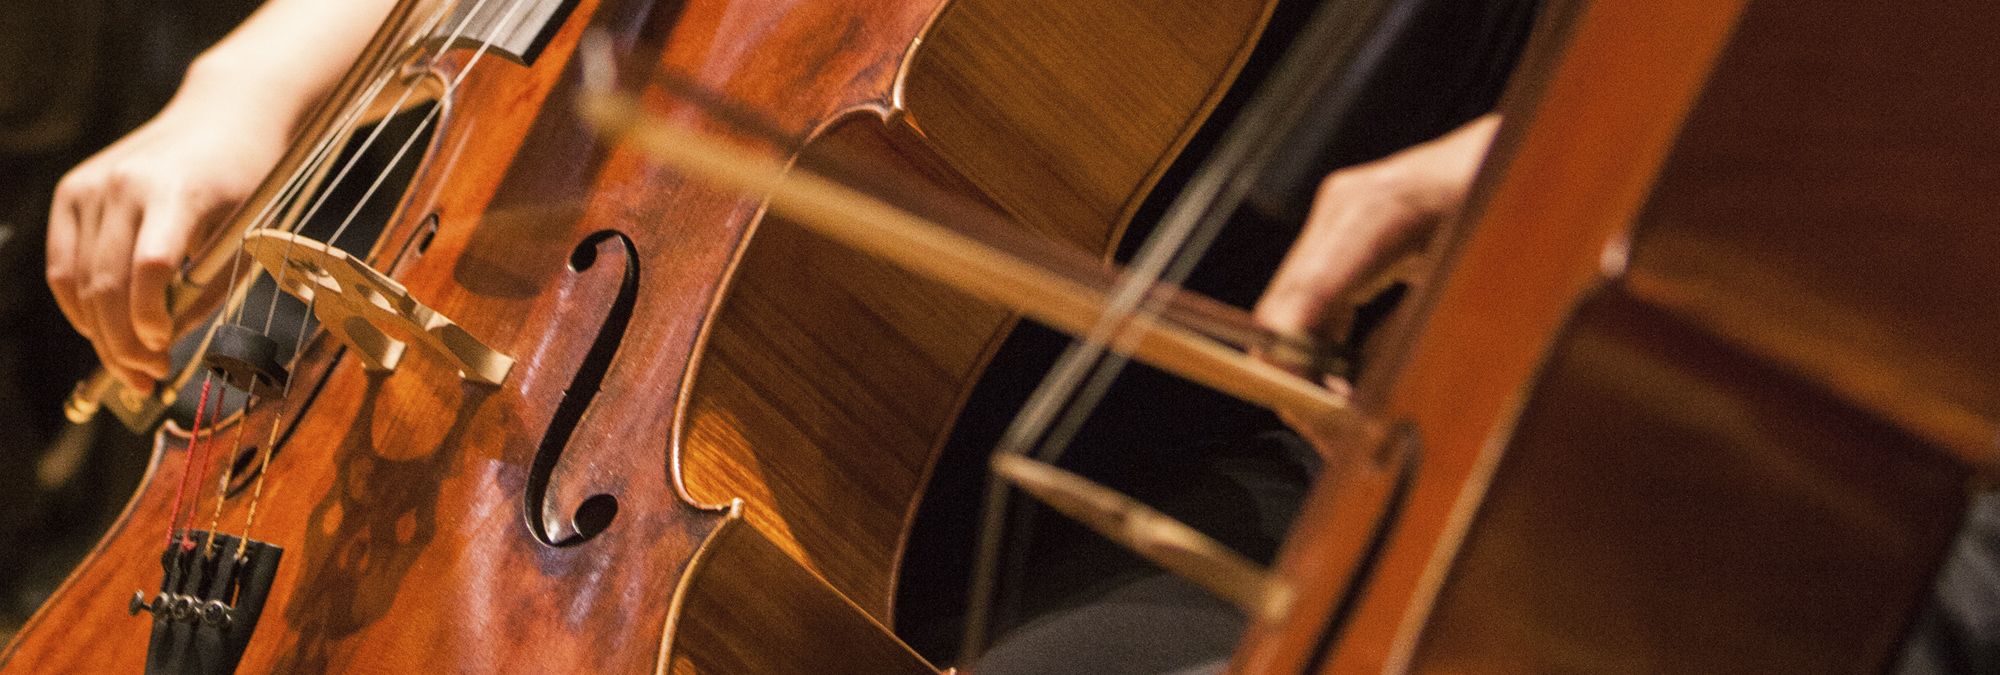 A close picture of the middle section of a cello while the bow moves across the strings